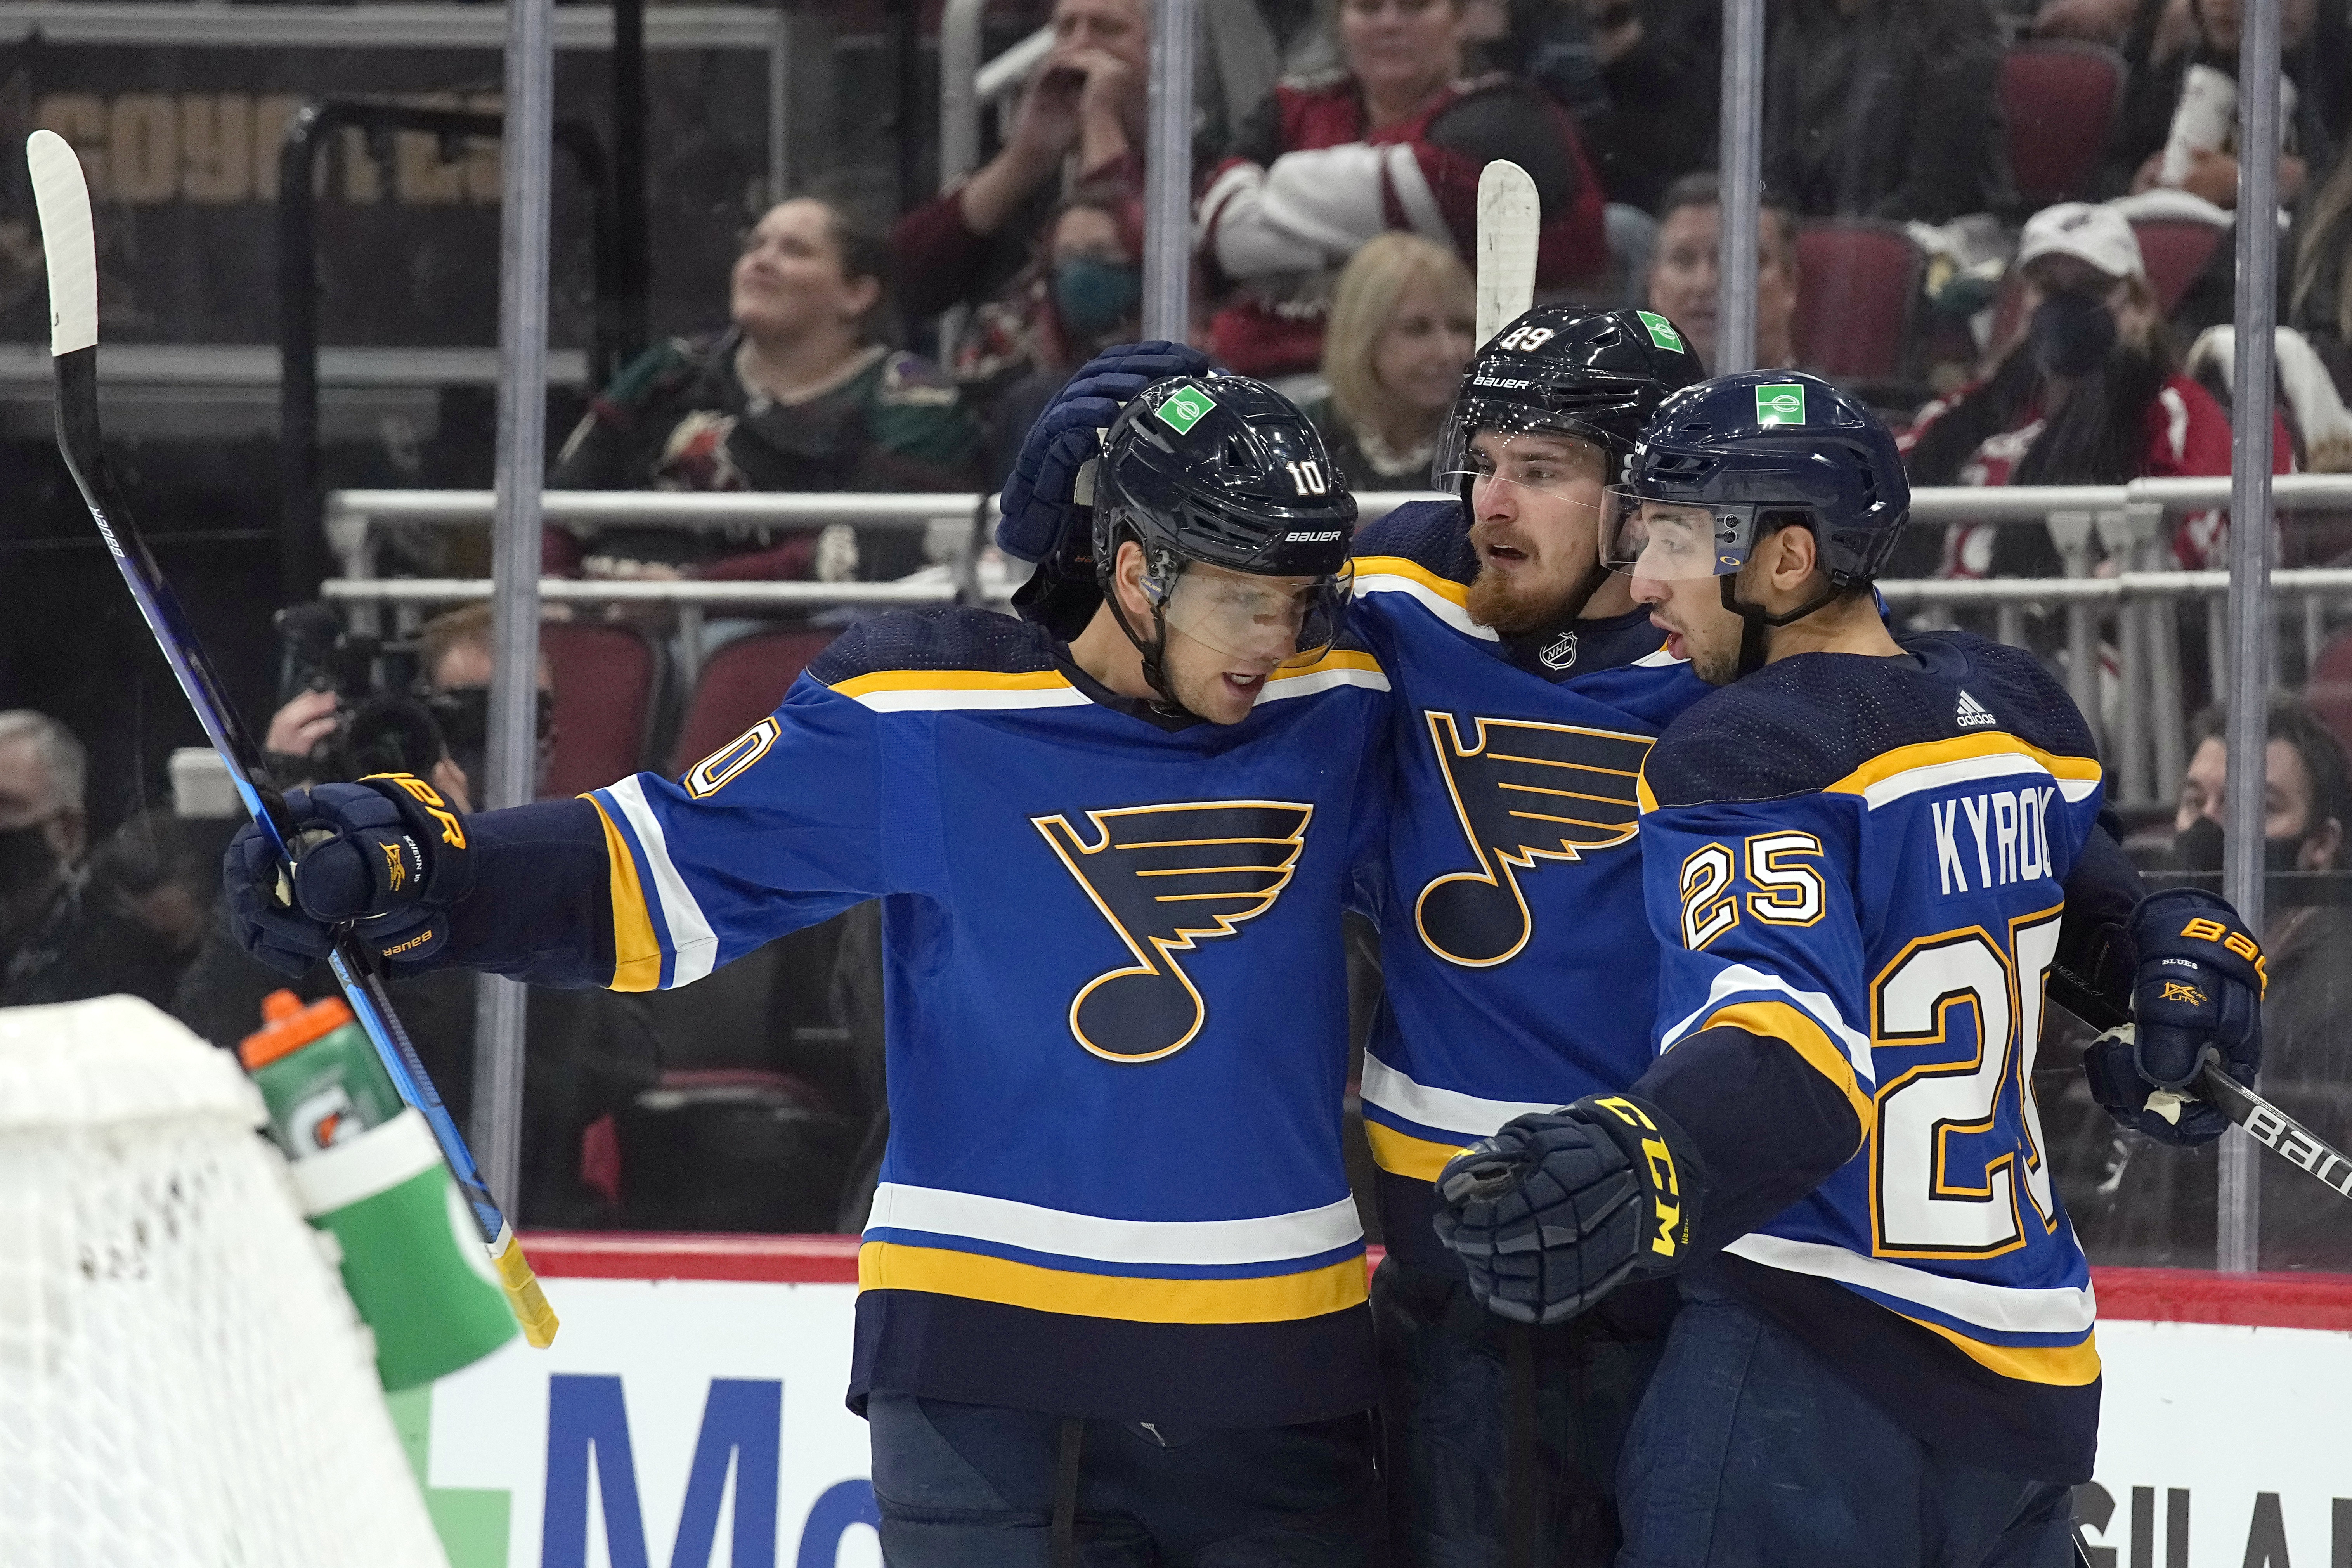 Wichita hosting Blues-Coyotes NHL exhibition in October